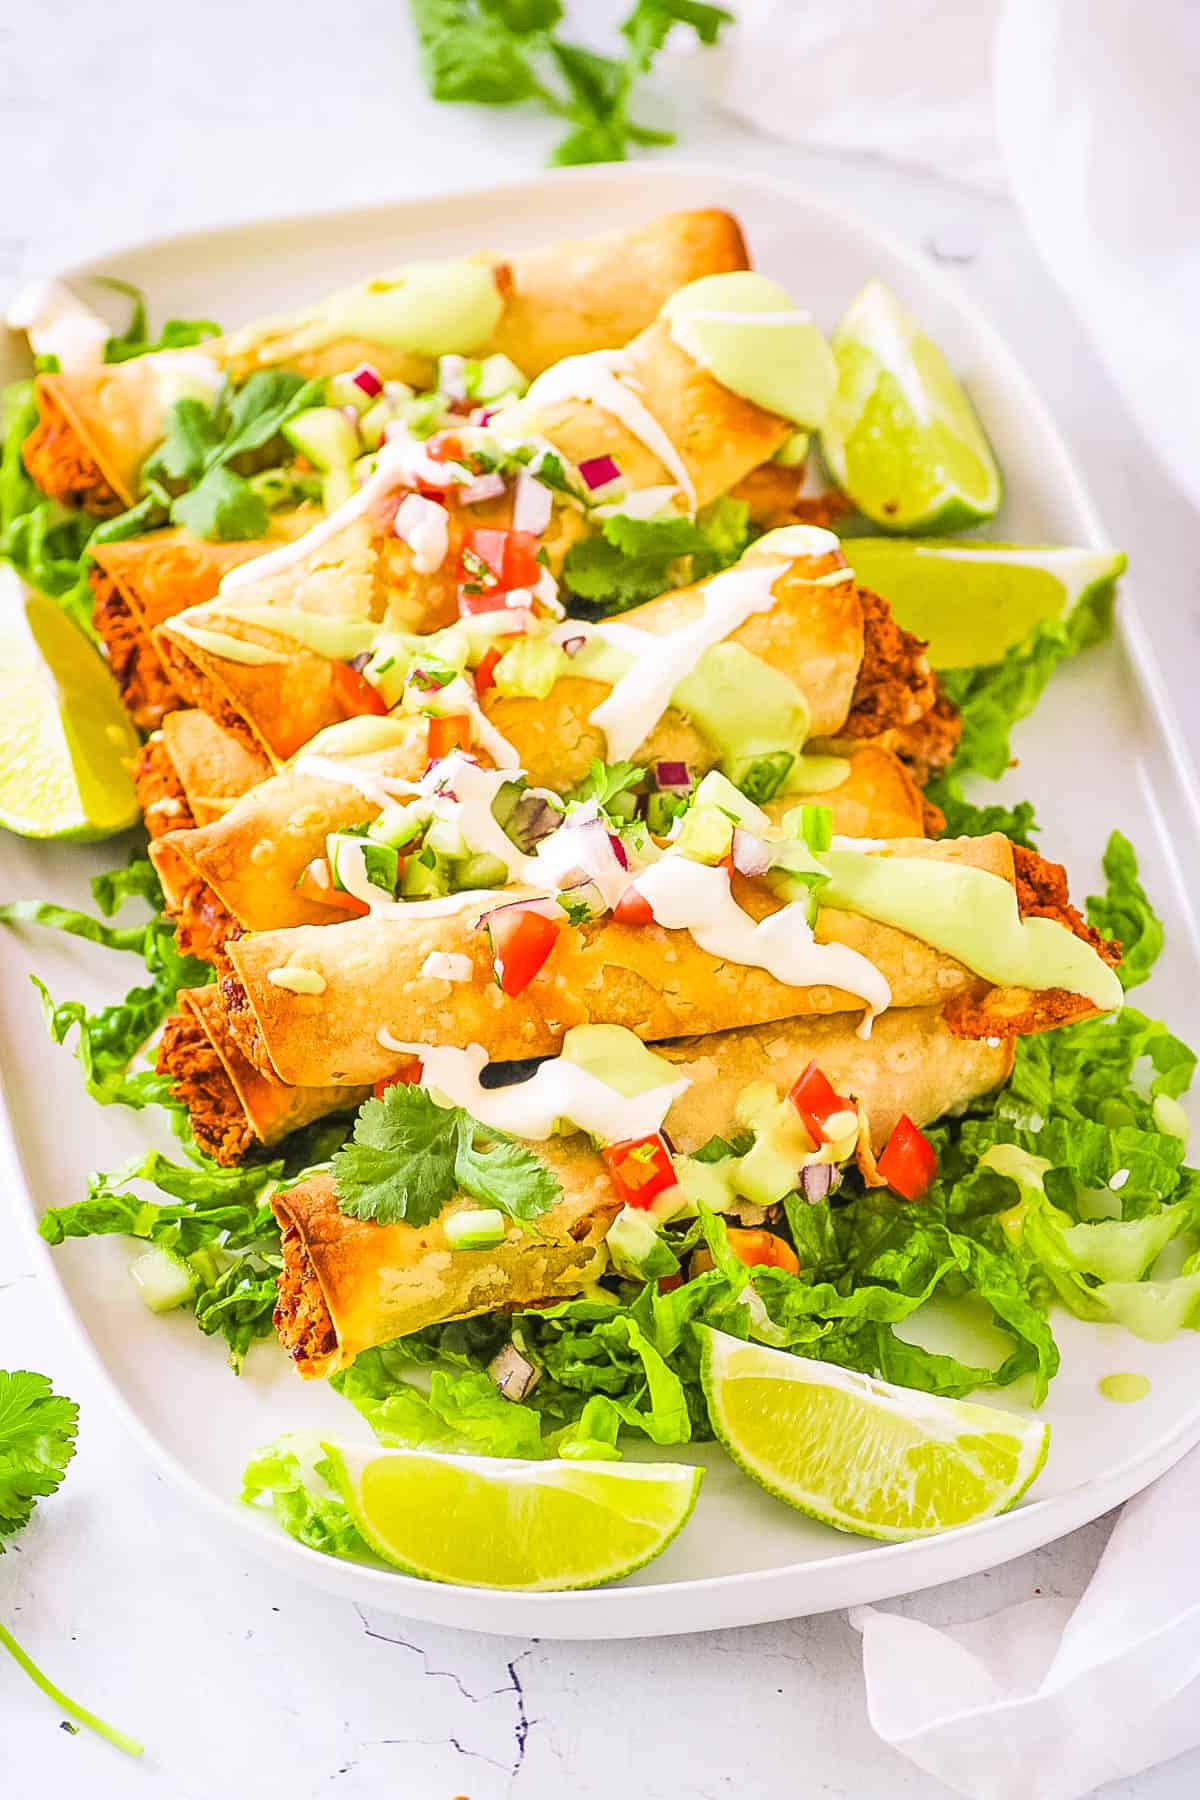 Healthy vegan taquitos topped with vegan sour cream, salsa and served on a white platter with lettuce and limes.